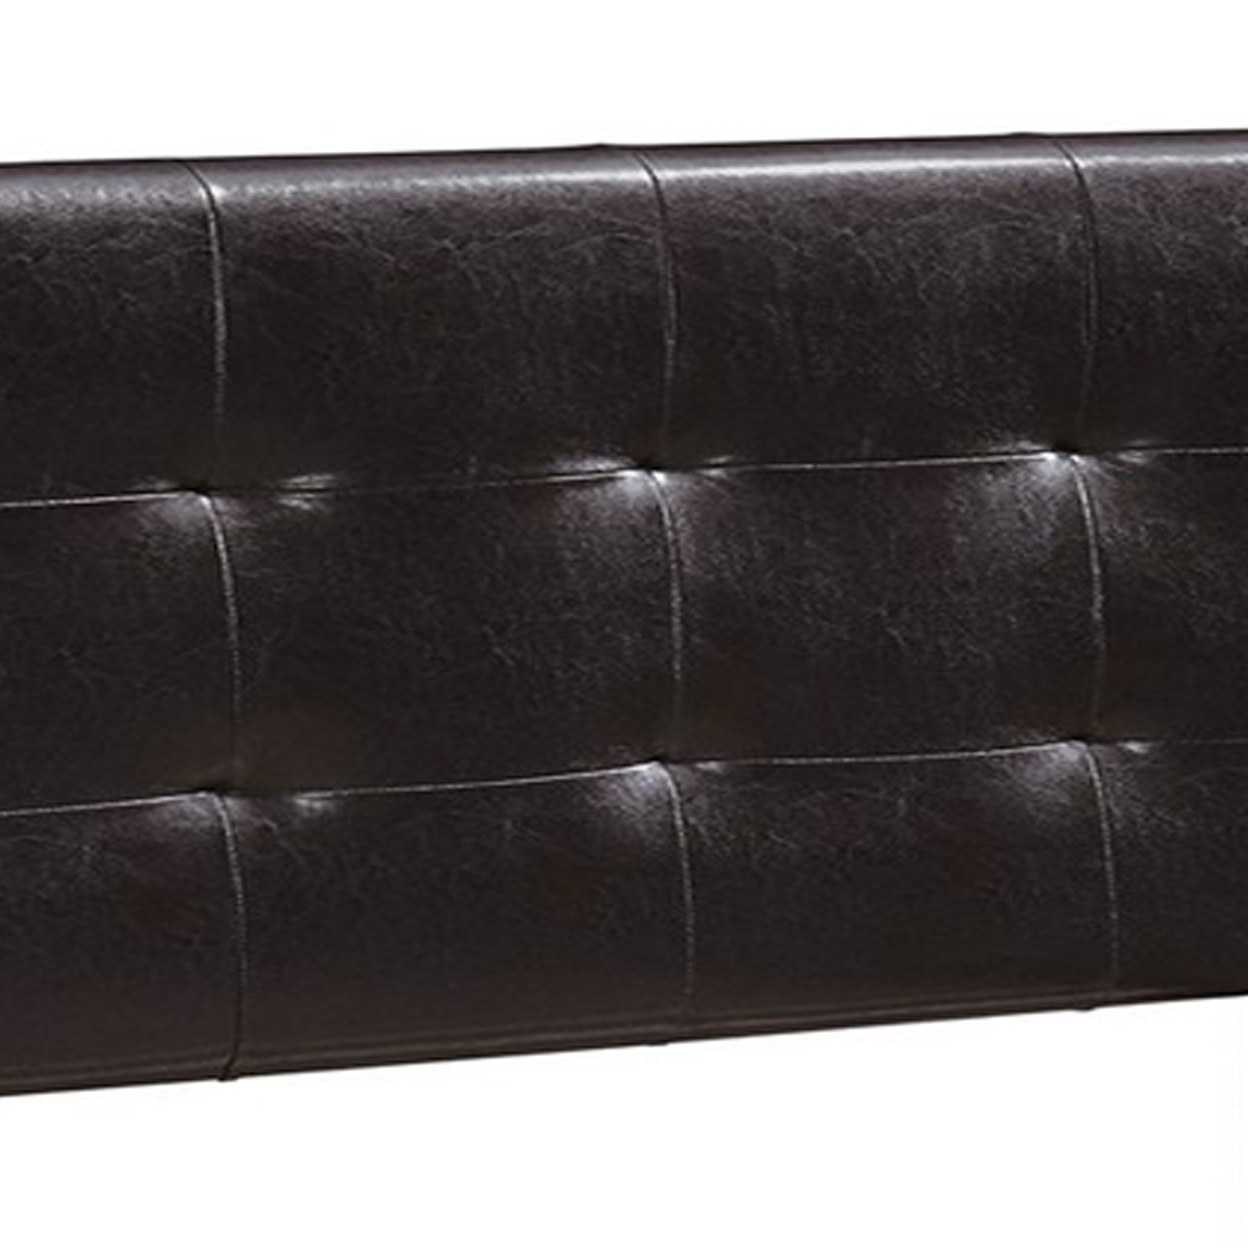 Queen Leatherette Bed With Checkered Tufted Headboard, Dark Brown- Saltoro Sherpi